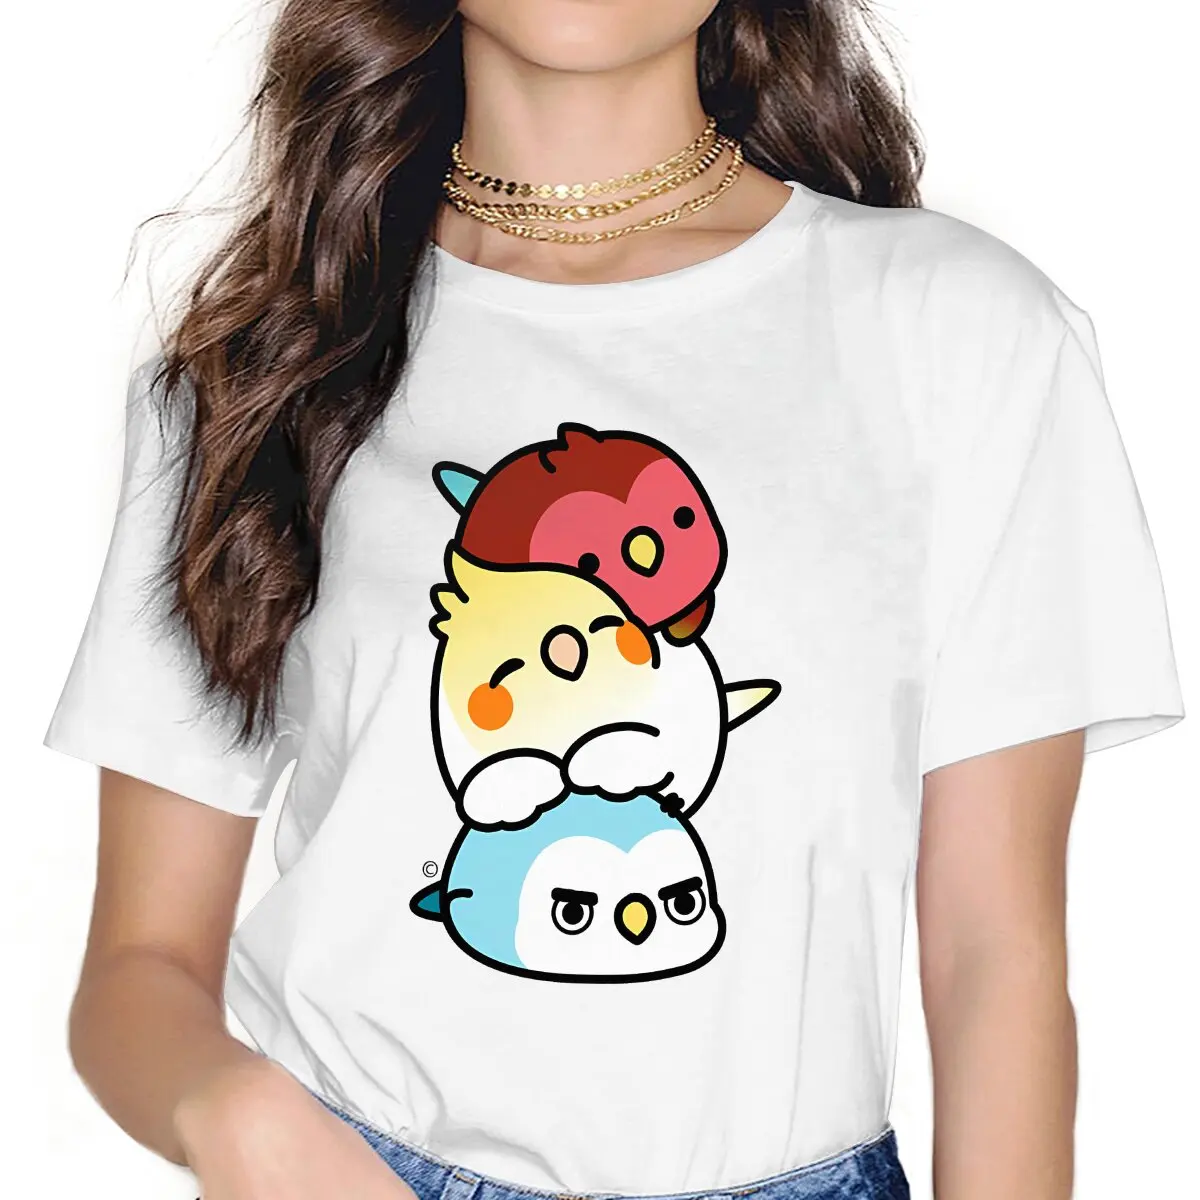 

Cody and Friends Dango TShirt For Women Parrot Birds Pet Y2k Tees Fashion Female Polyester T Shirt Soft Graphic